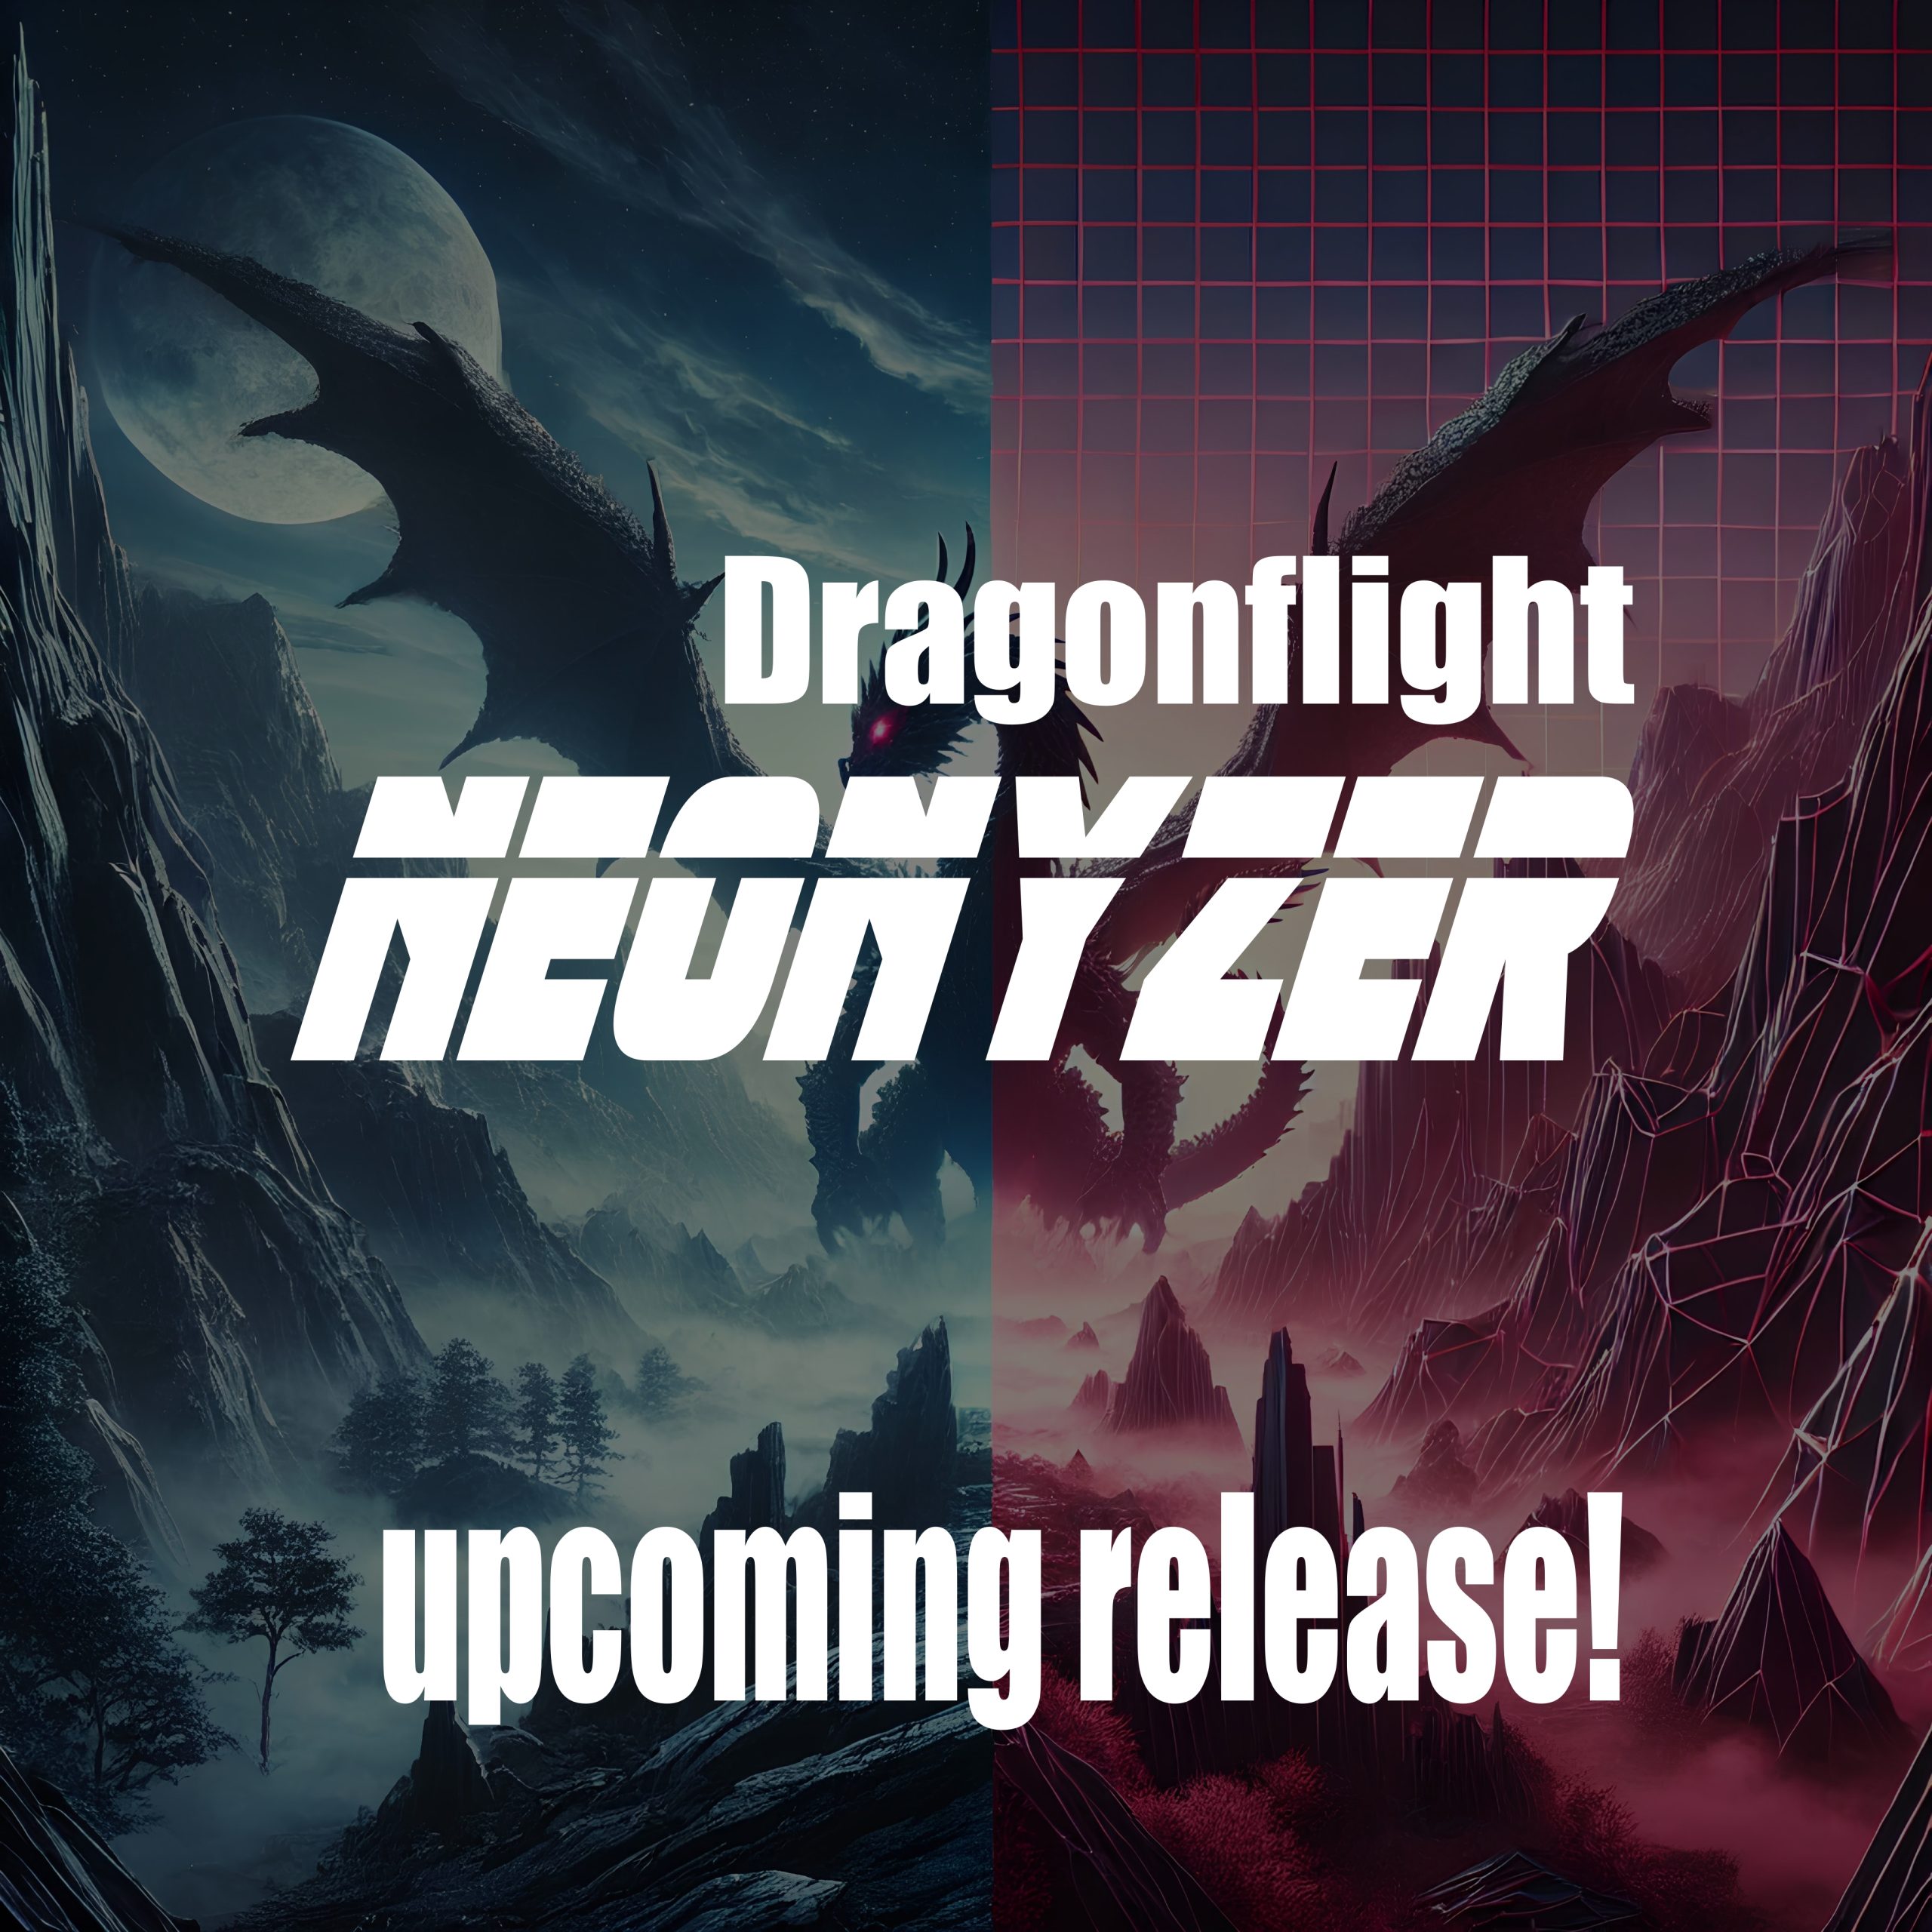 Upcoming release Dragonflight